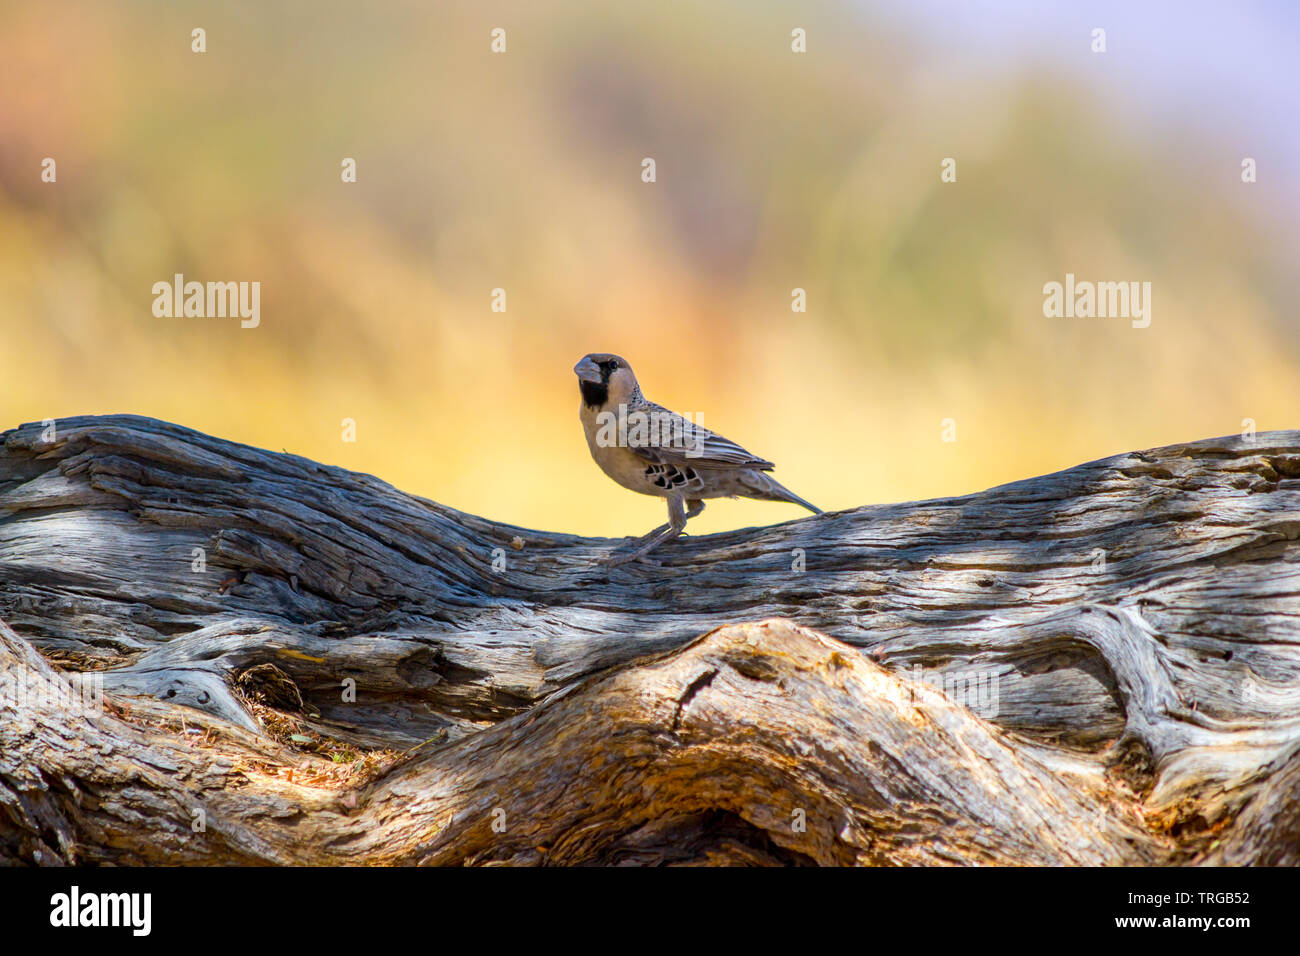 Single sparrow sitting on a wooden branch Stock Photo